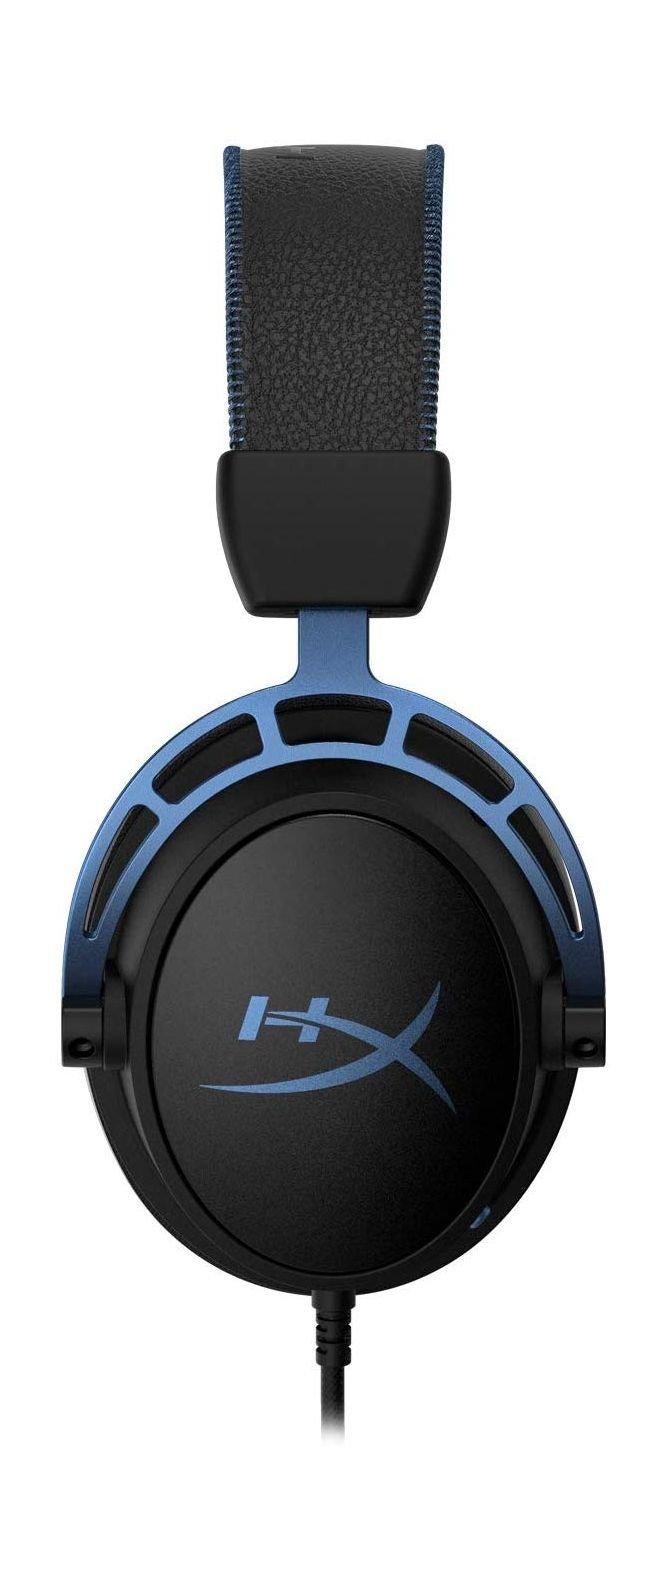 OFF Price Hyperx Alpha Kuwait, Gaming S In Wired Cloud 57% Headphone